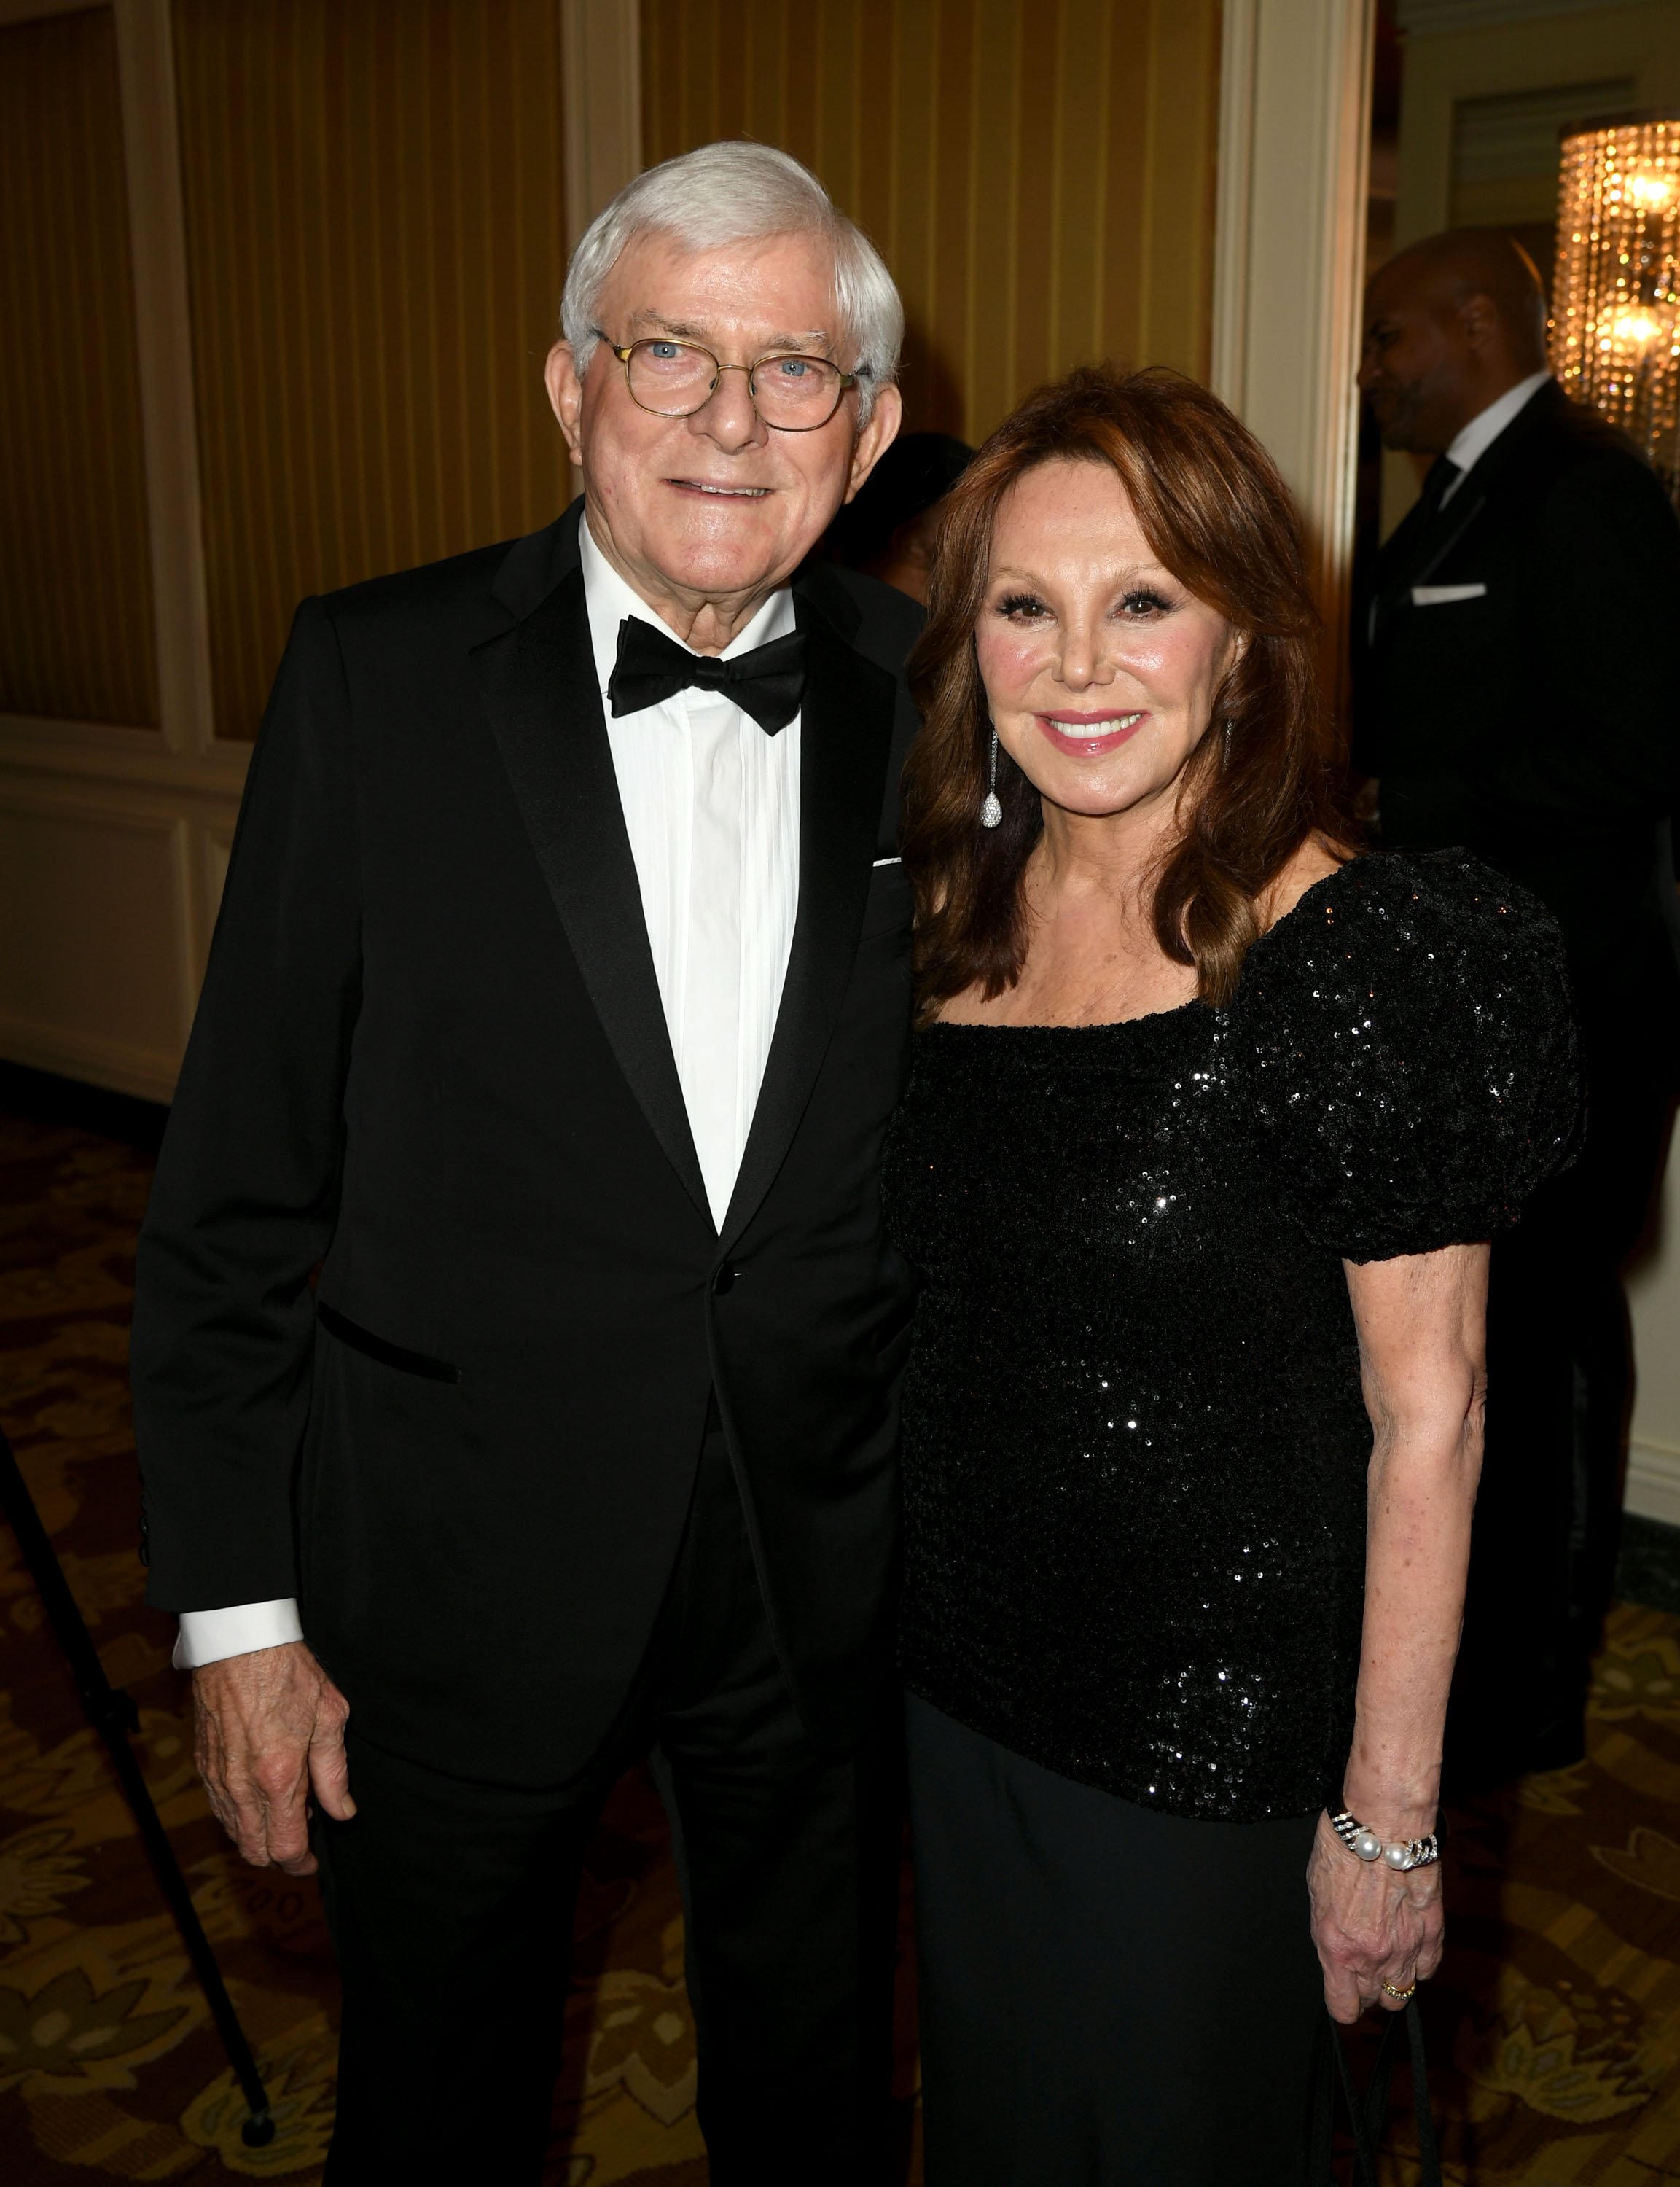 Phil Donahue and Marlo Thomas arrive at the American Icon Awards at the Beverly Wilshire Four Seasons Hotel on May 19, 2019 in Beverly Hills, California. | Photo: GettyImages